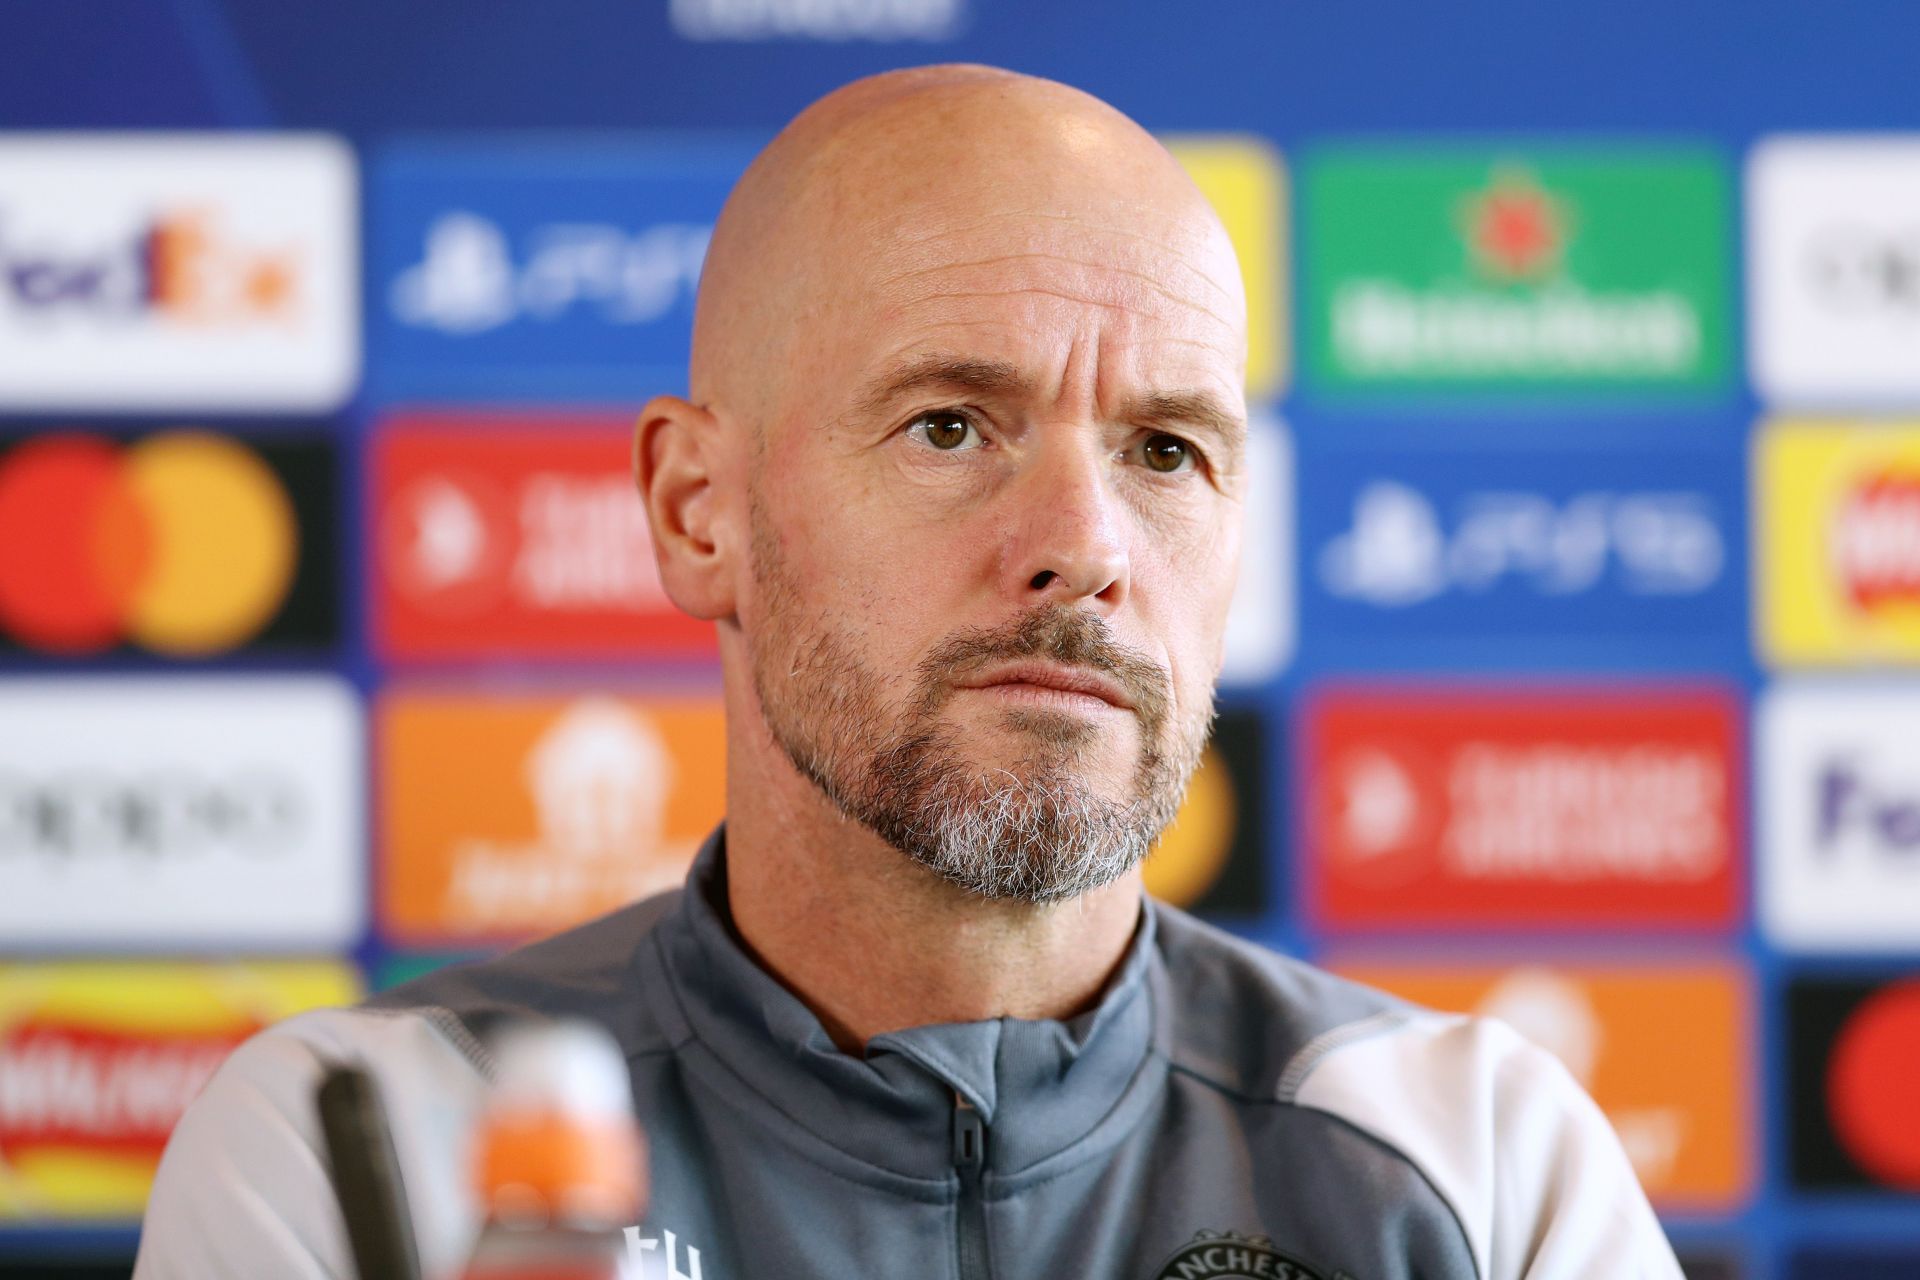 Erik ten Hag will speak candidly about the situation.